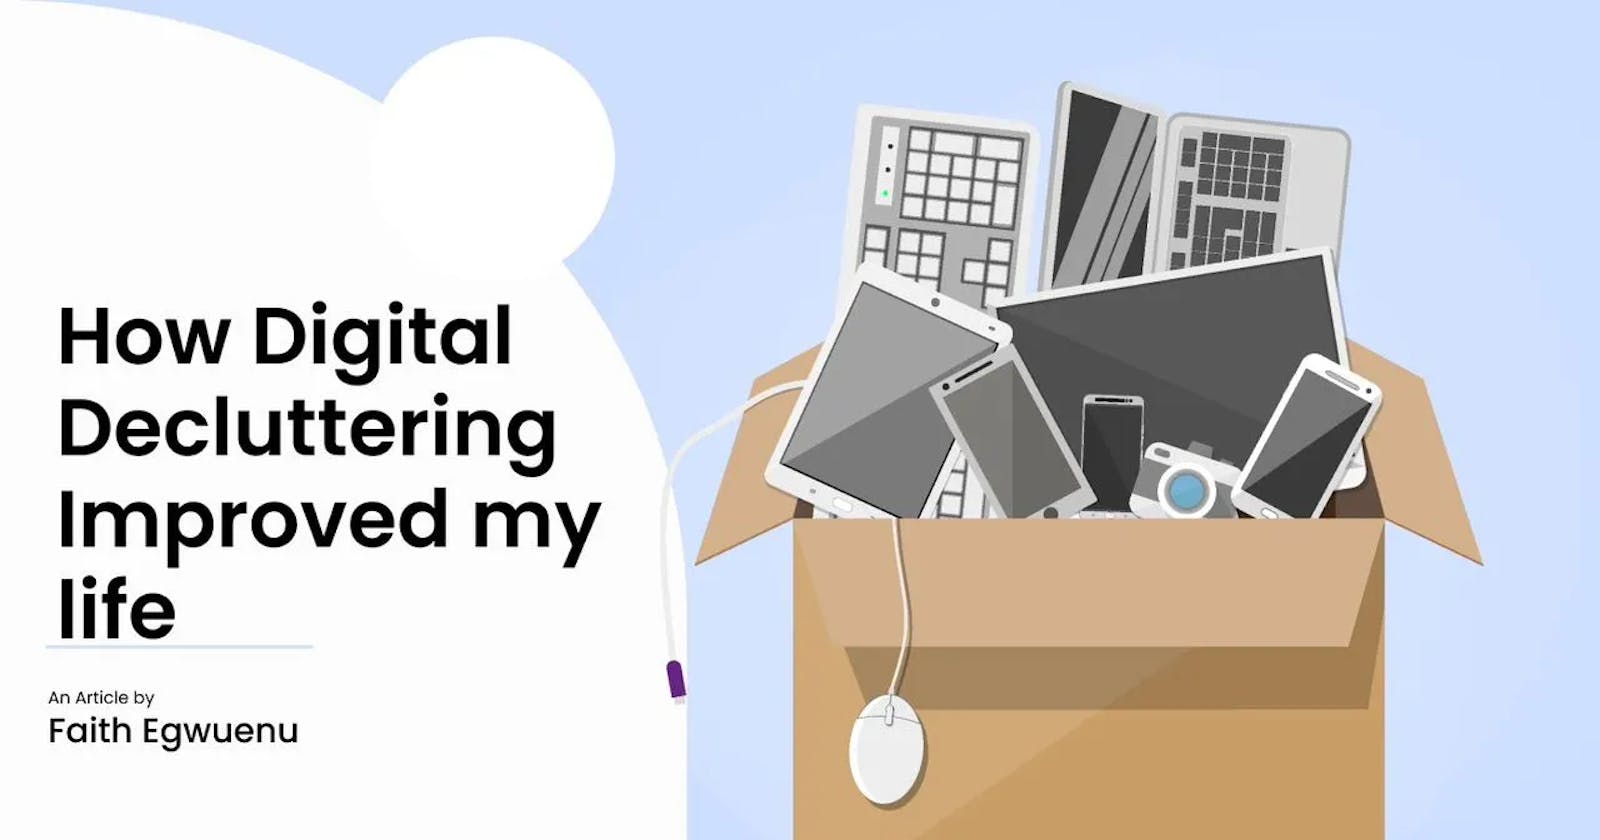 How Digital Decluttering Improved My Life